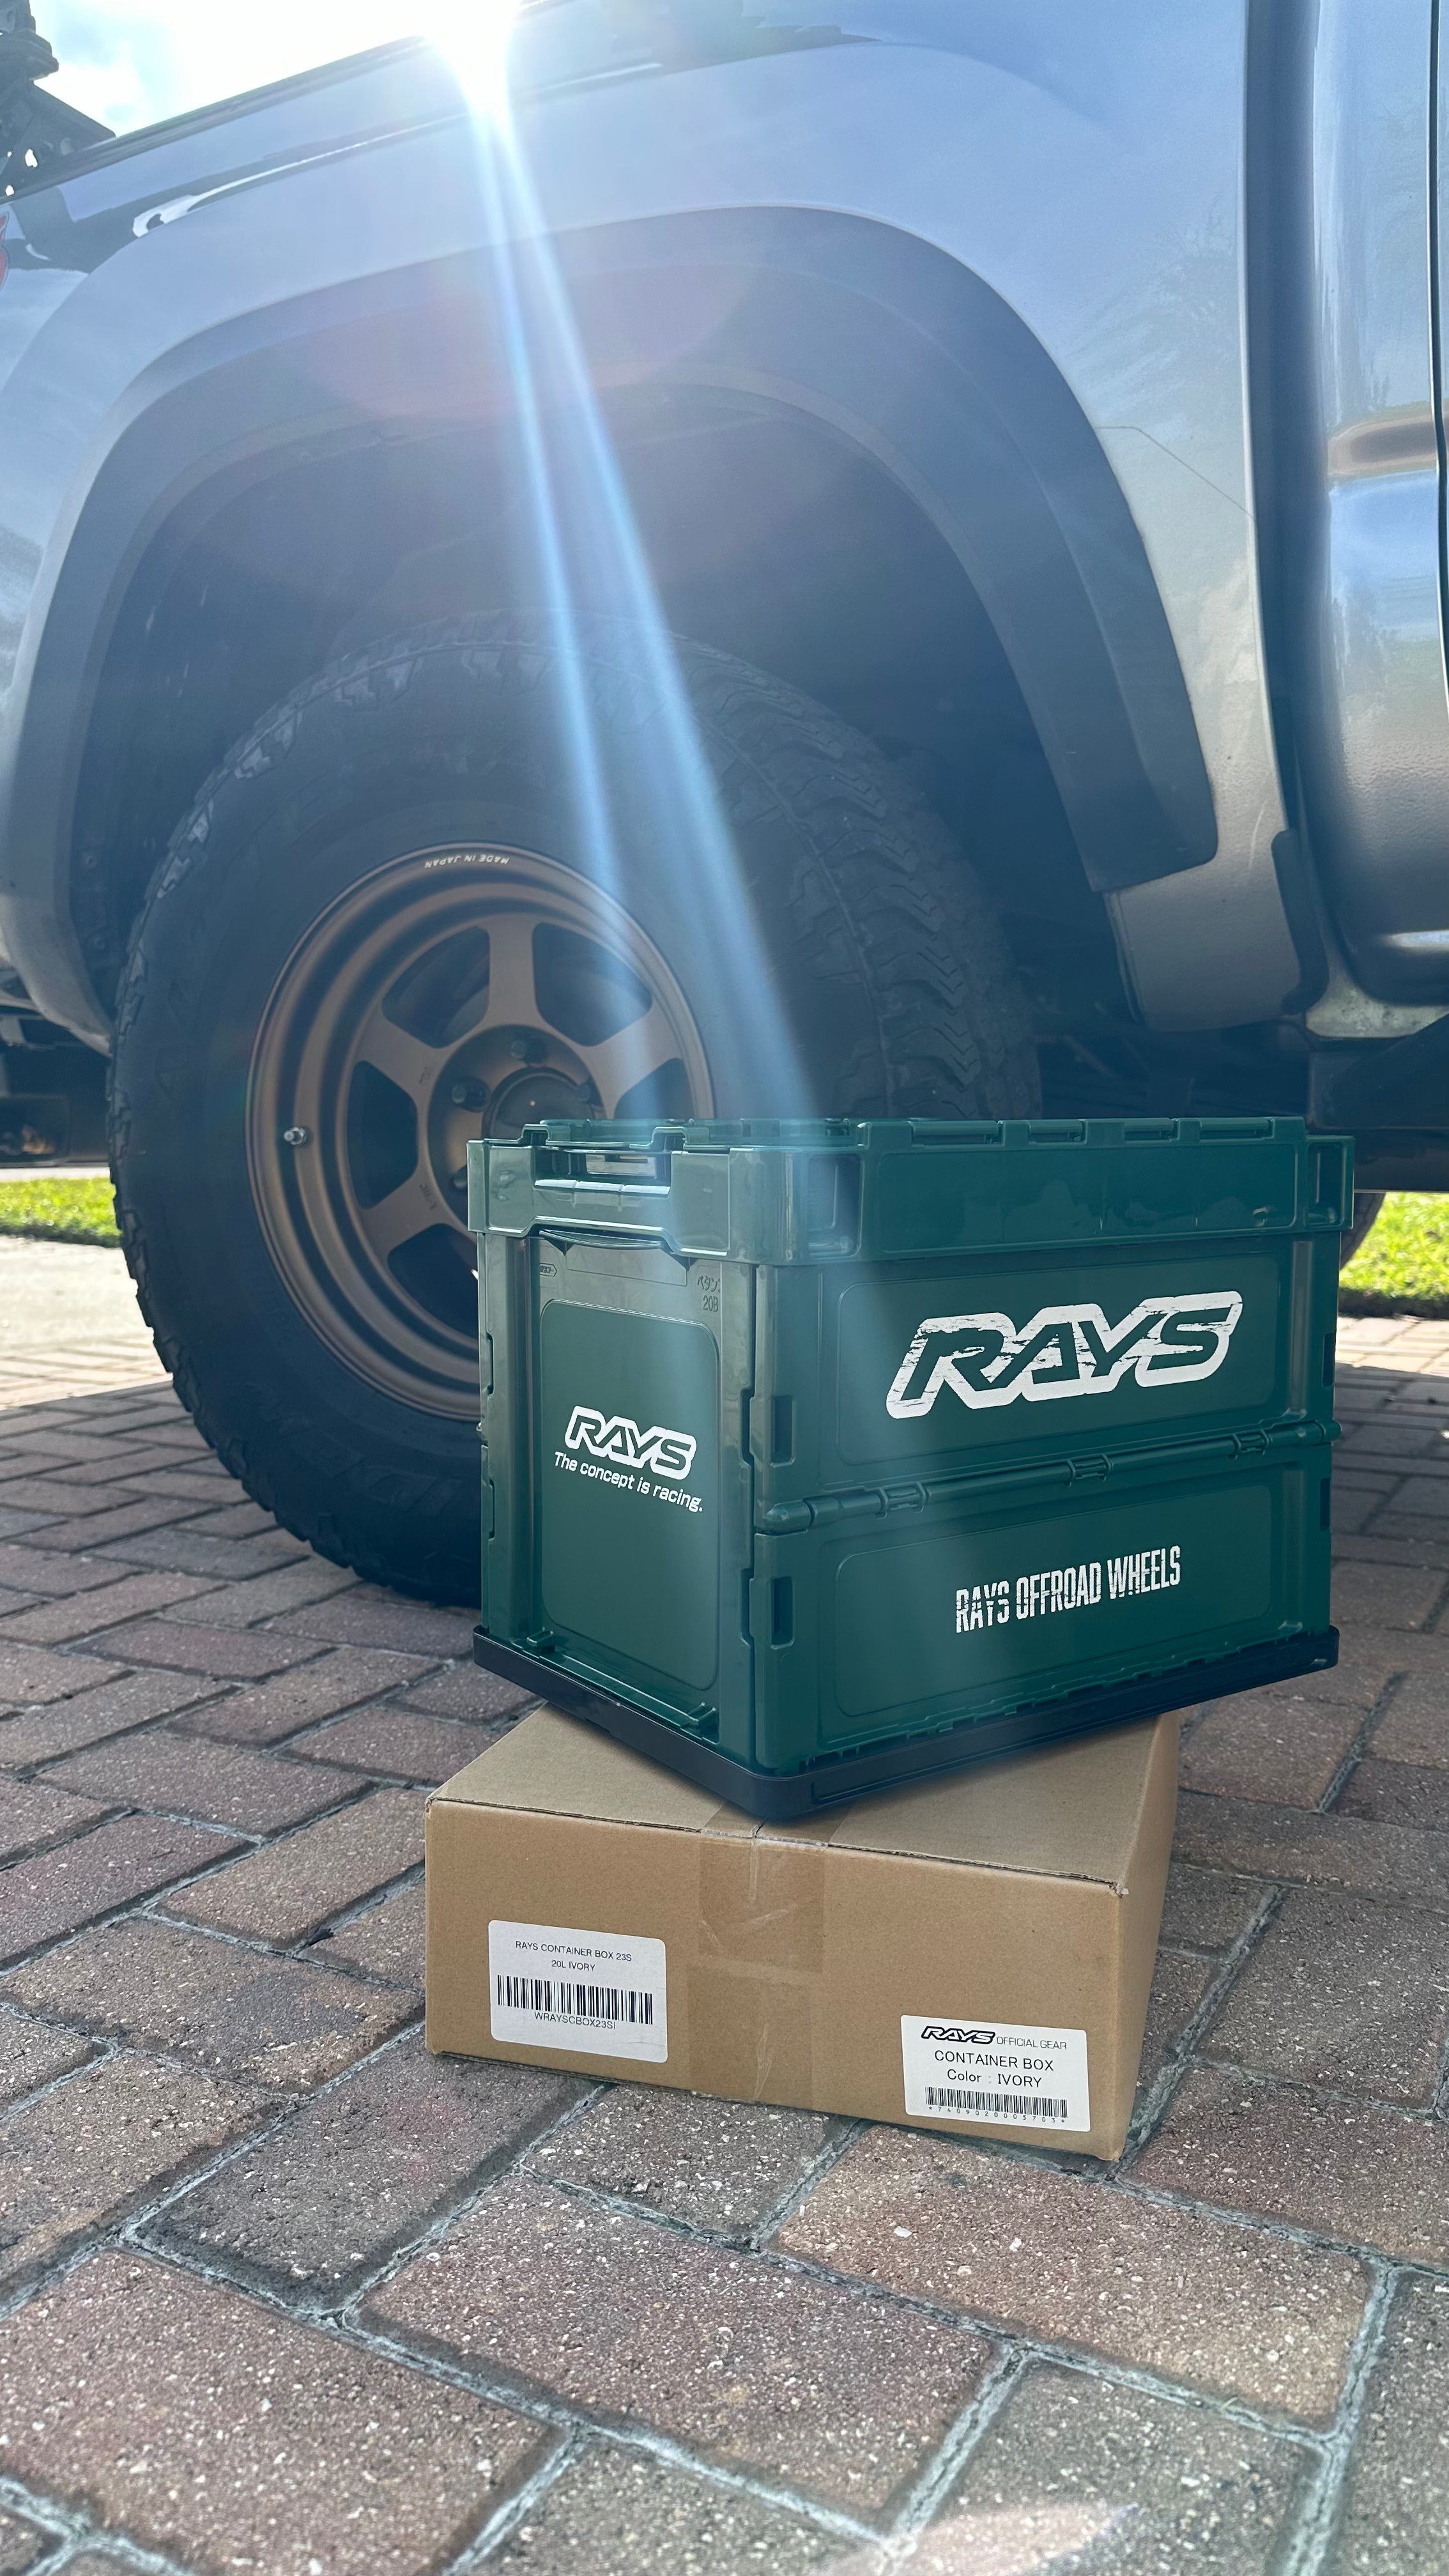 Rays Folding Oliver Green Container Box 23S 20L